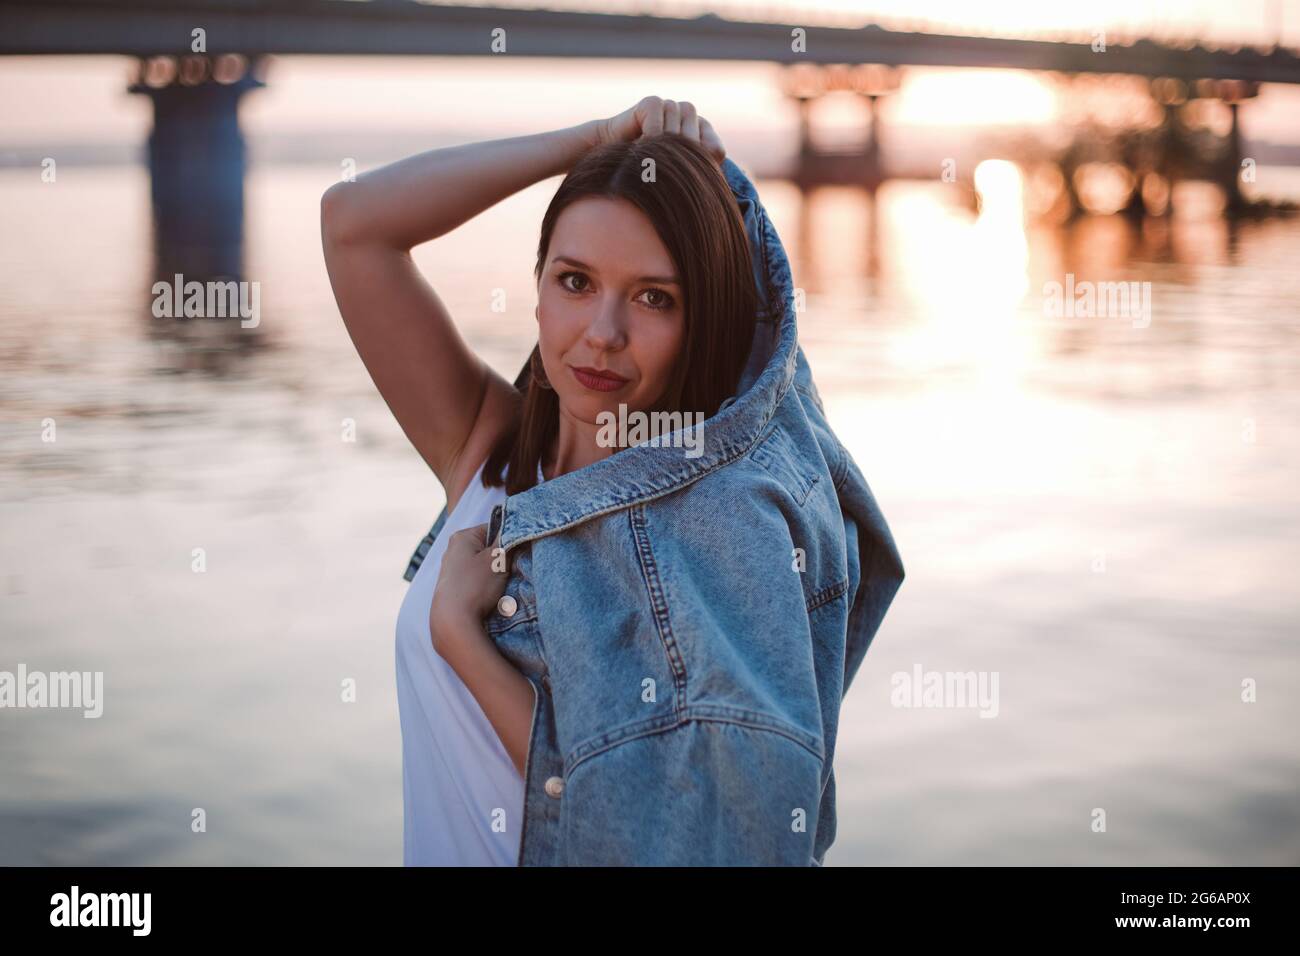 Gorgeous brunette girl with long flowing hair dressed in jeans jacket and jeans  poses standing on the dark background in the studio Stock Photo by  Leikaproduction 247804188